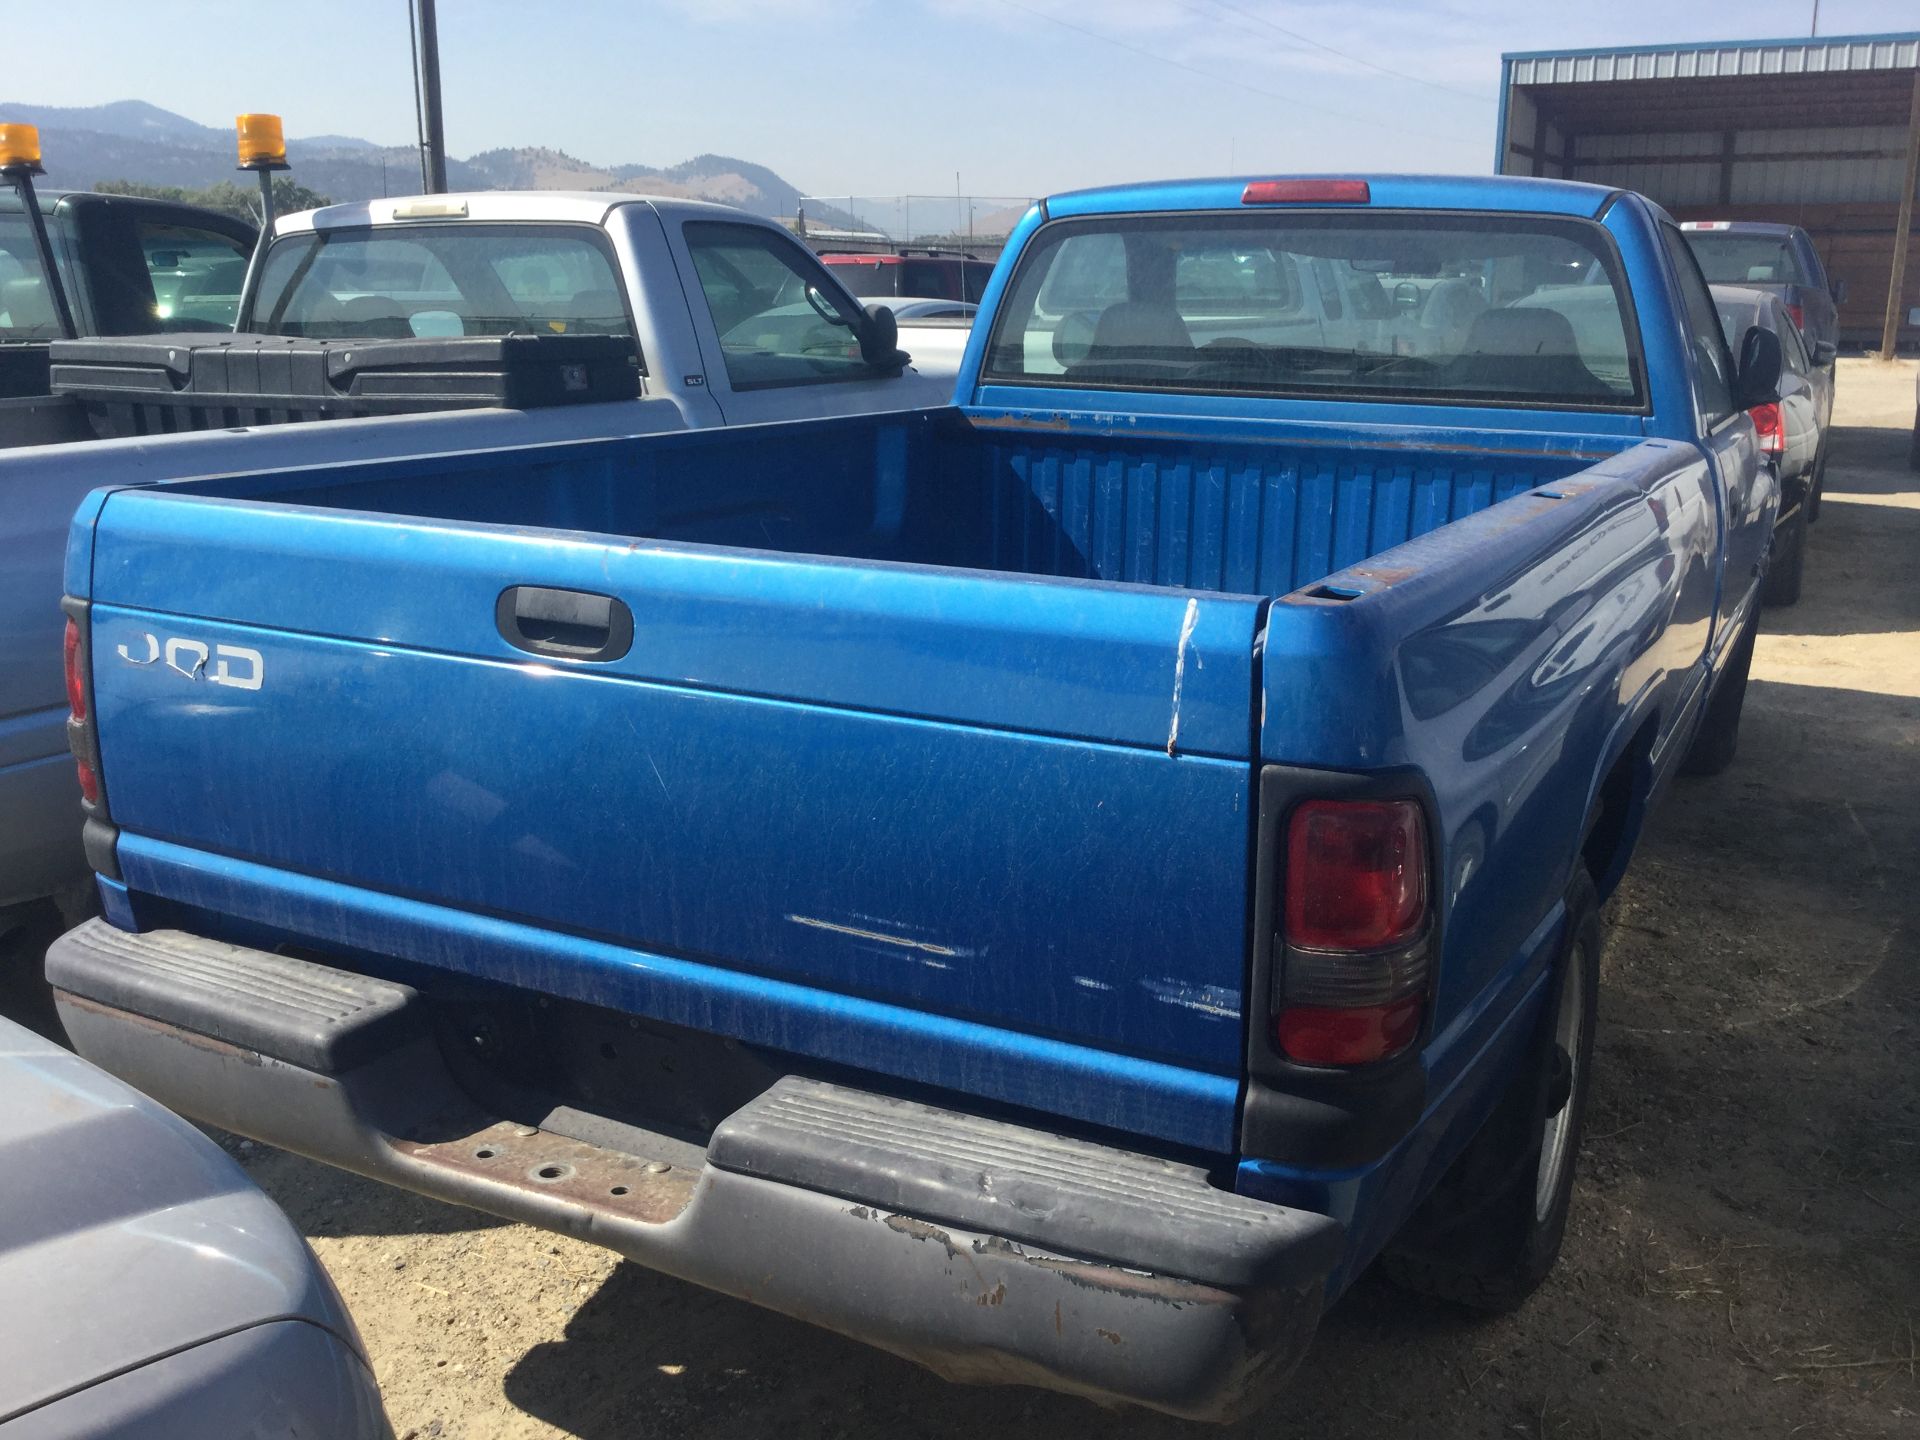 Year: 1999 Make: Dodge Model: 1/2T Type: Pickup Vin#: 233325 Mileage/Hours: 132328 3.9L, 2WD, - Image 4 of 4